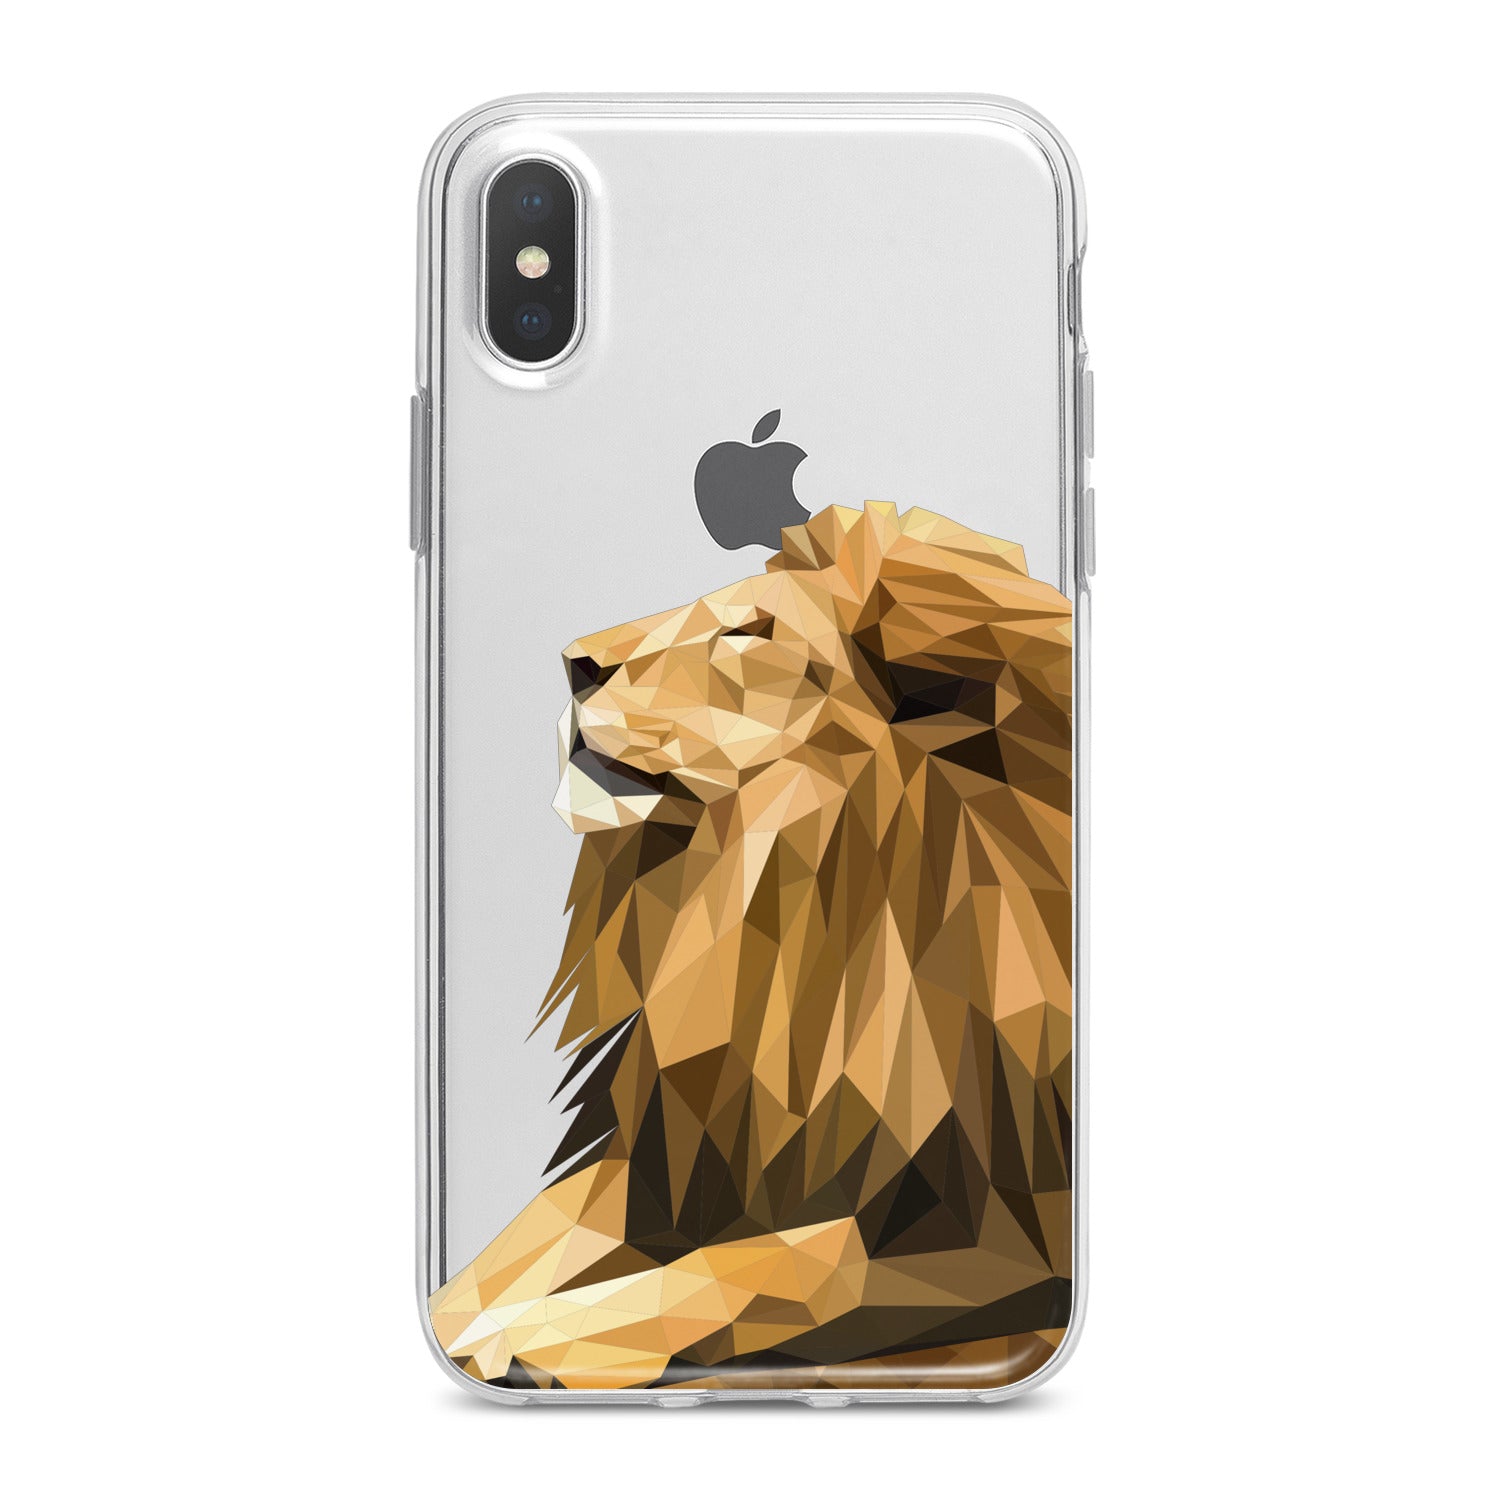 Lex Altern Lion Animal Phone Case for your iPhone & Android phone.